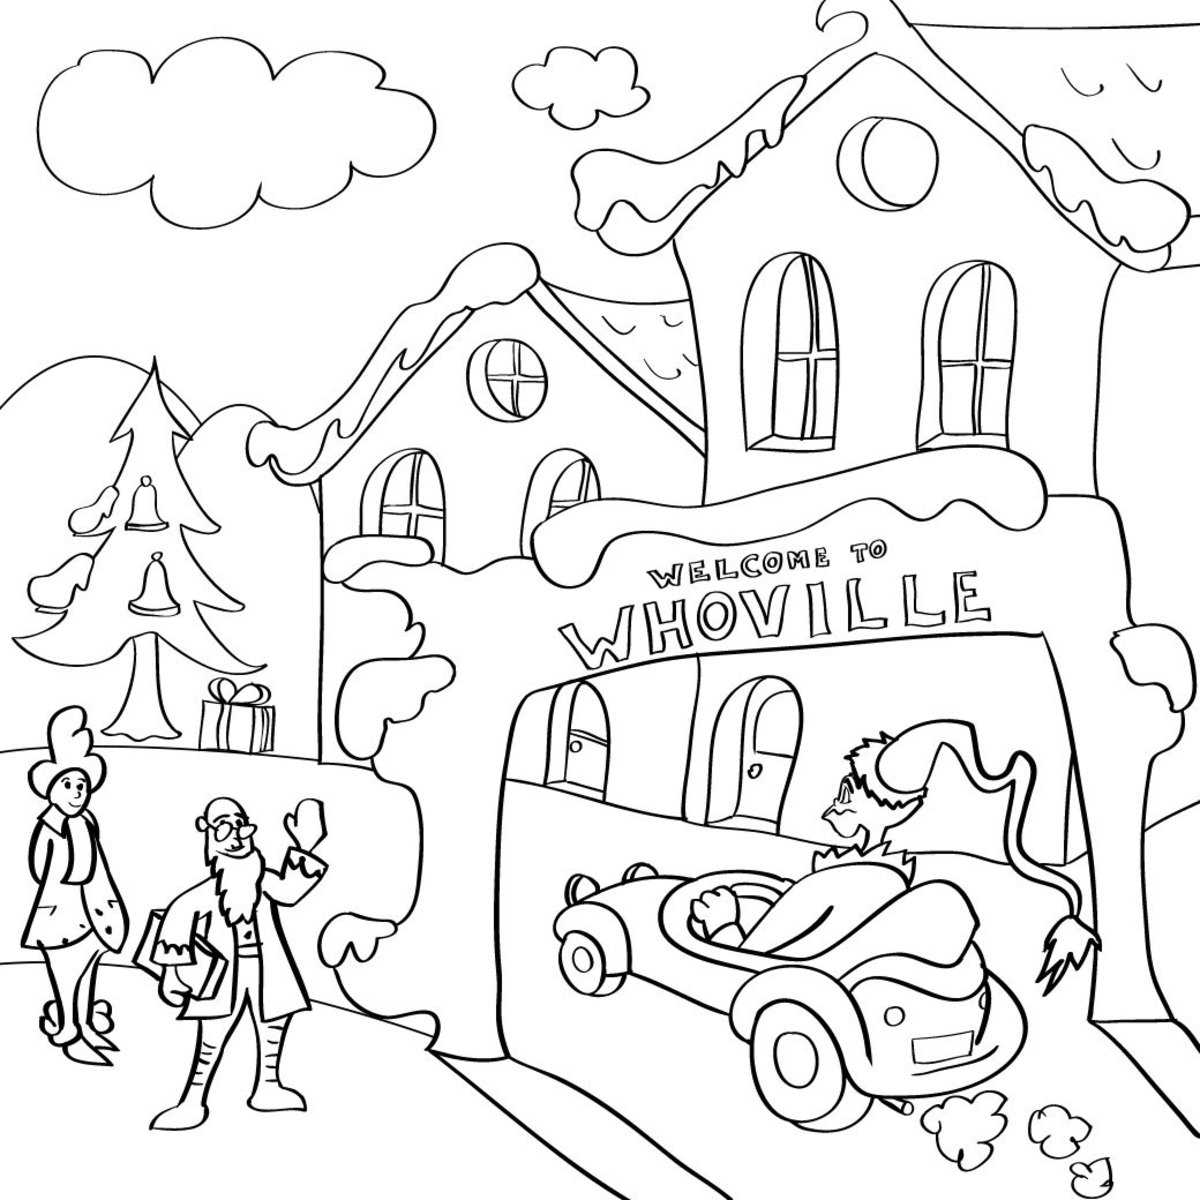 Coloring page of the Grinch entering Whoville